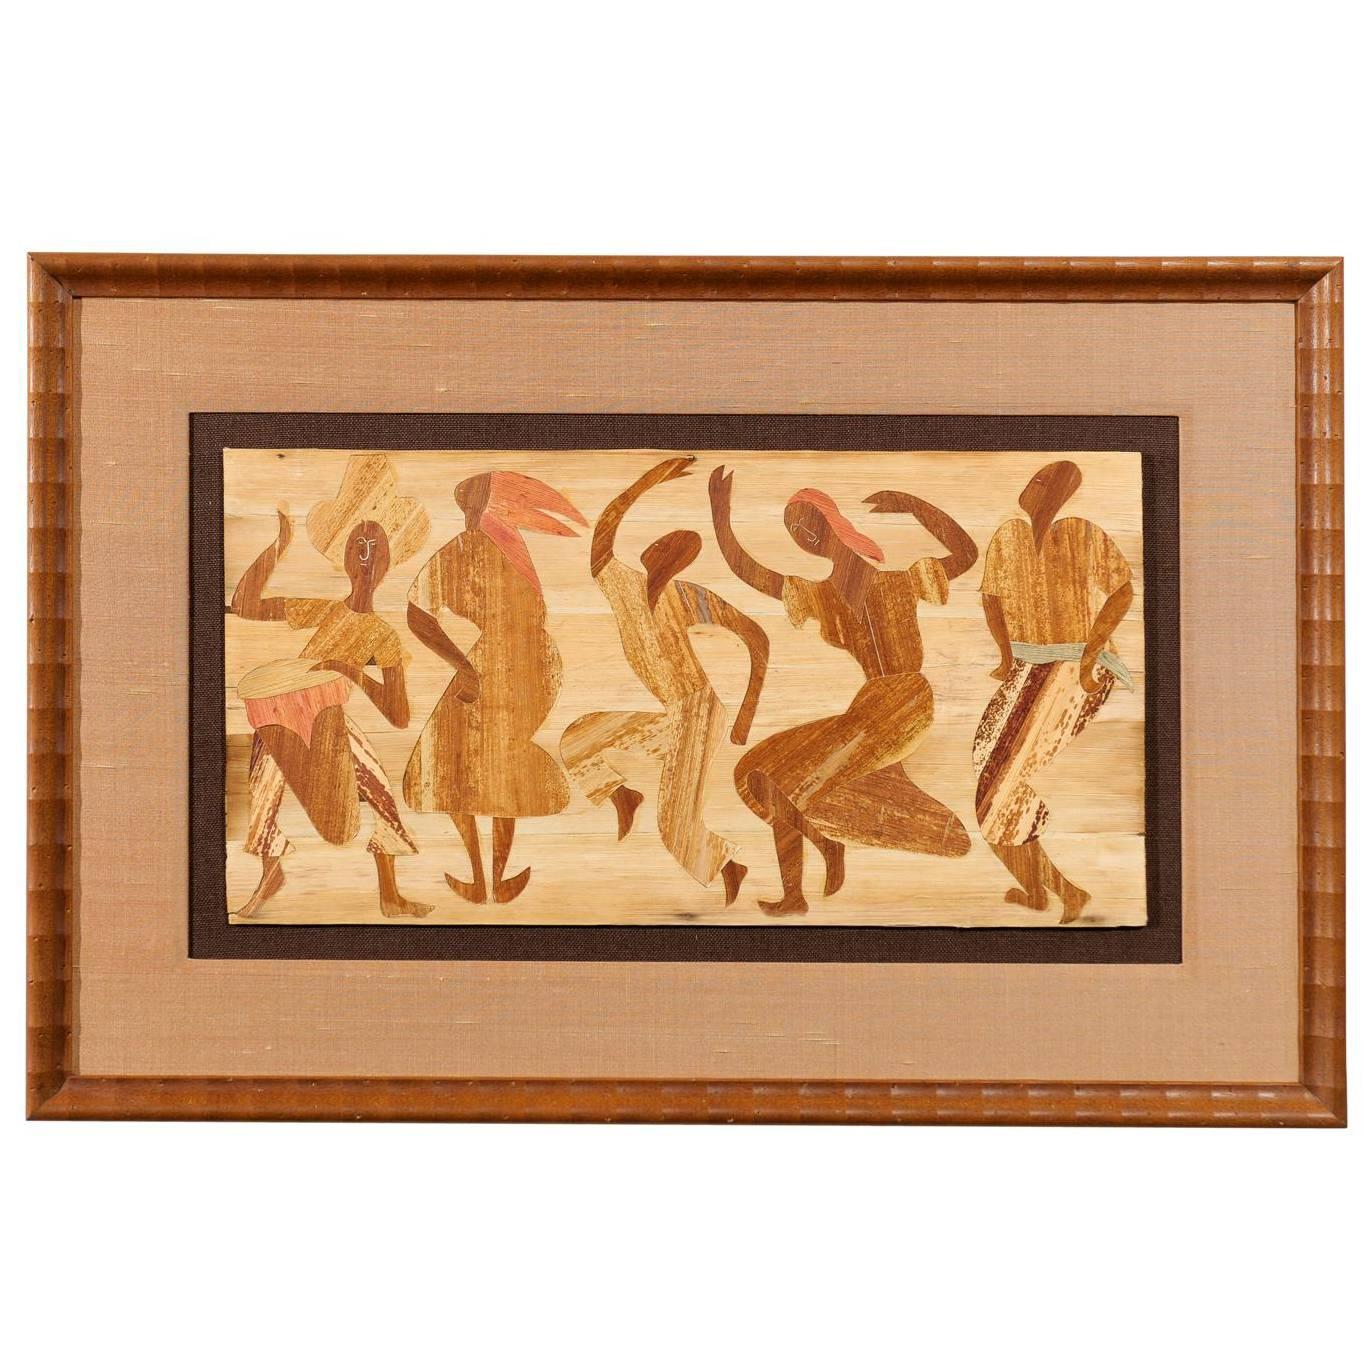 Exceptional Folk Art Dance Scene Executed in Wood Inlay